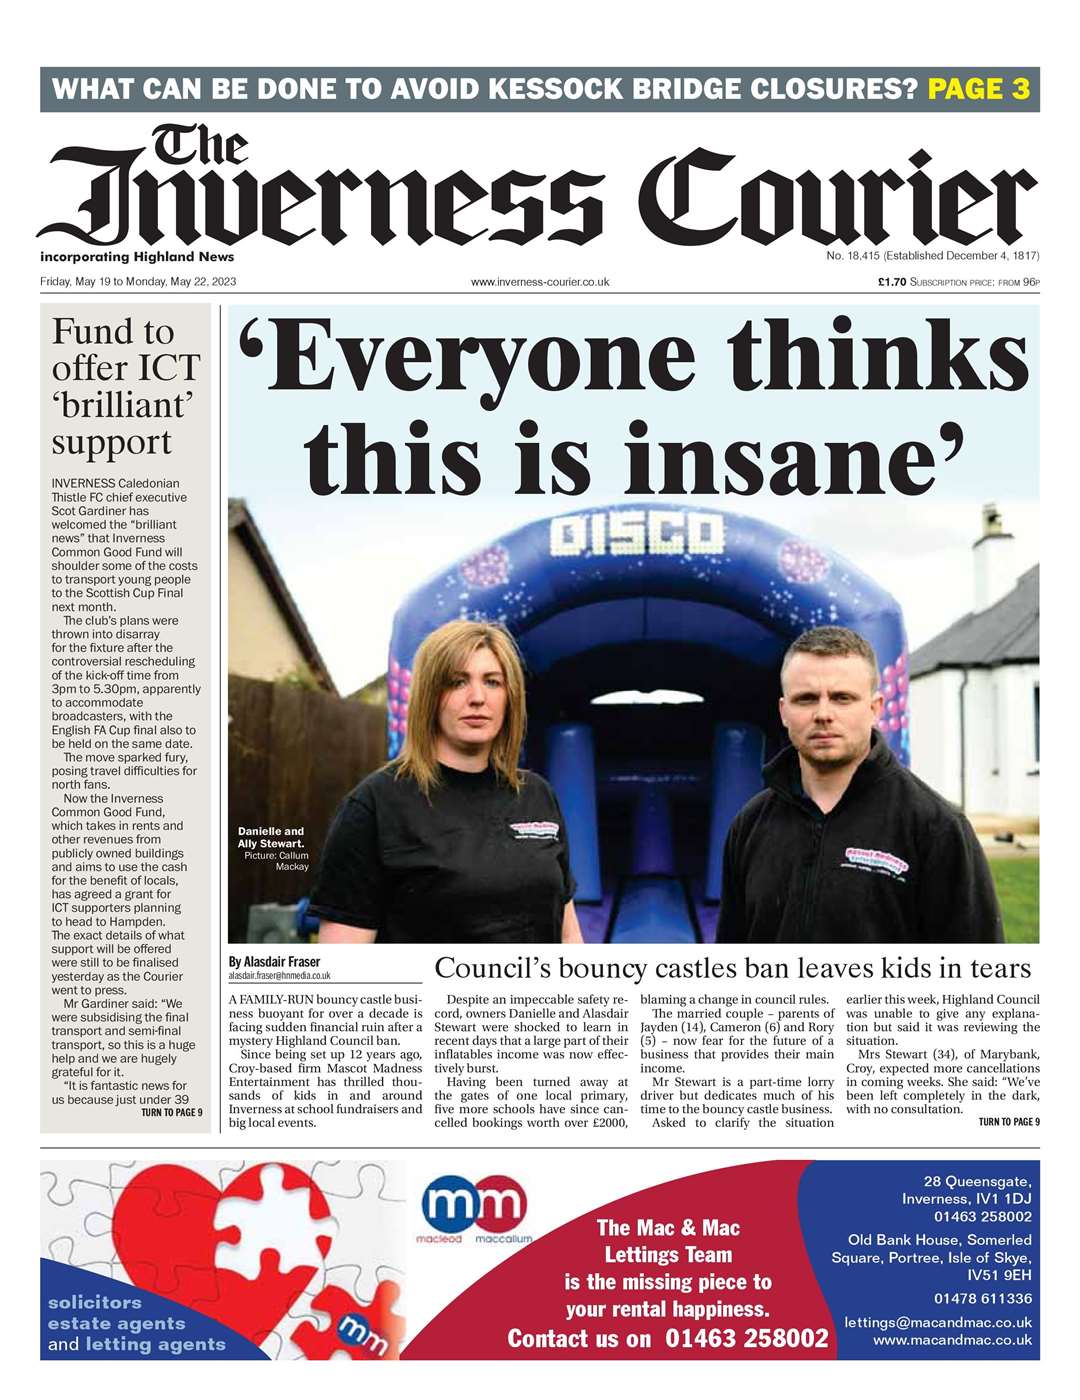 The Inverness Courier, May 19, front page.